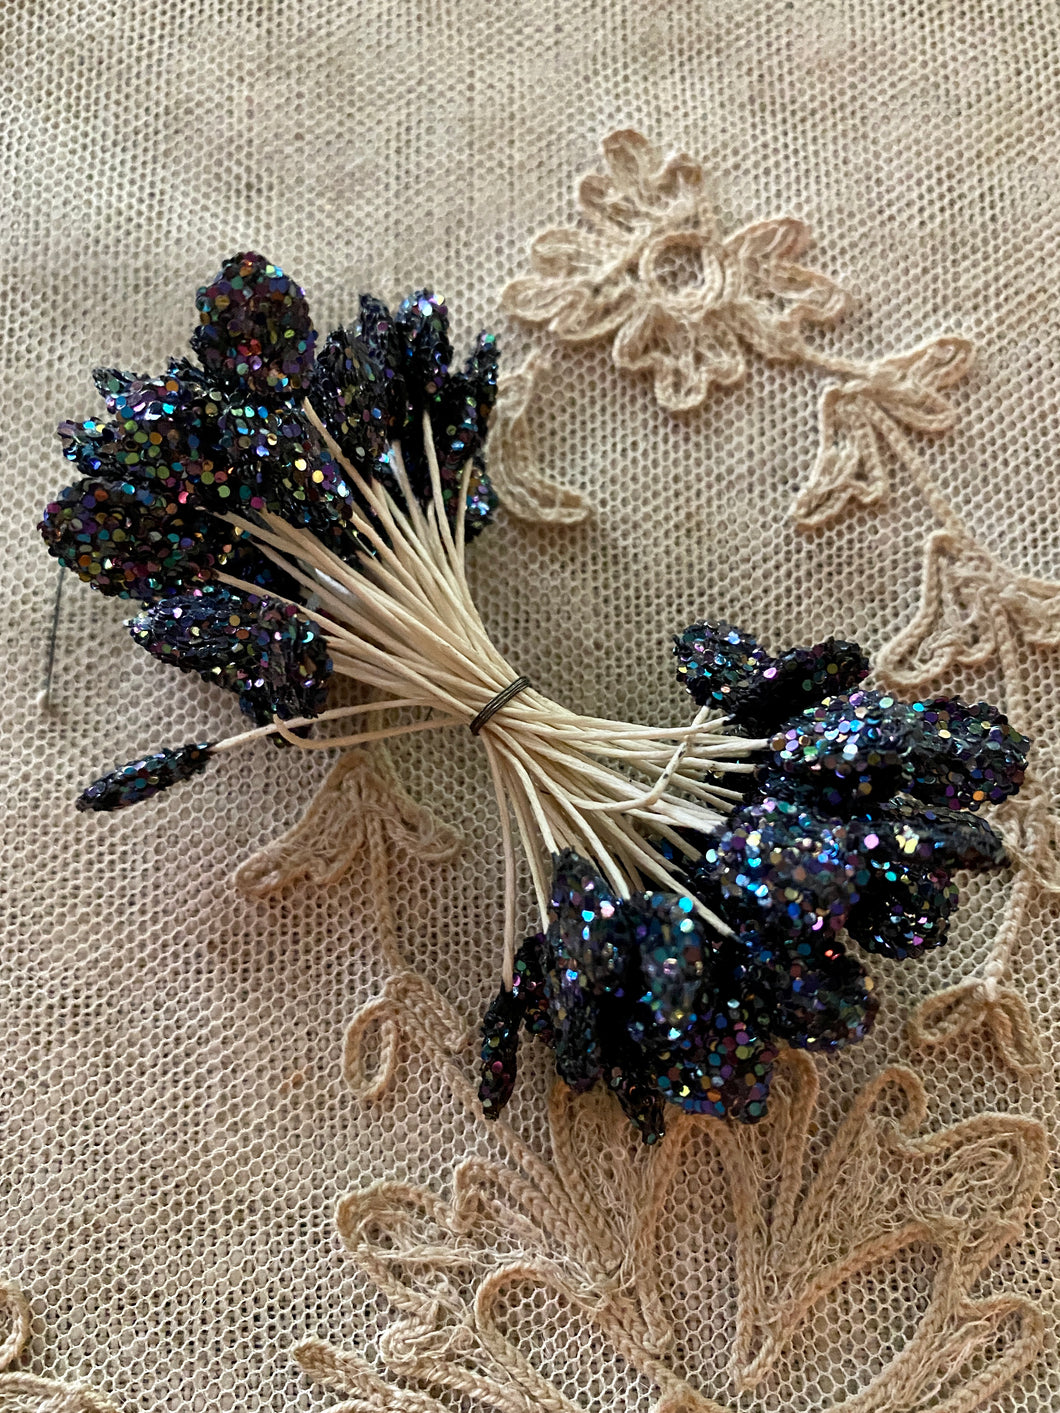 French Antique Millinery Buds with Iridescent Glitter in Black or White